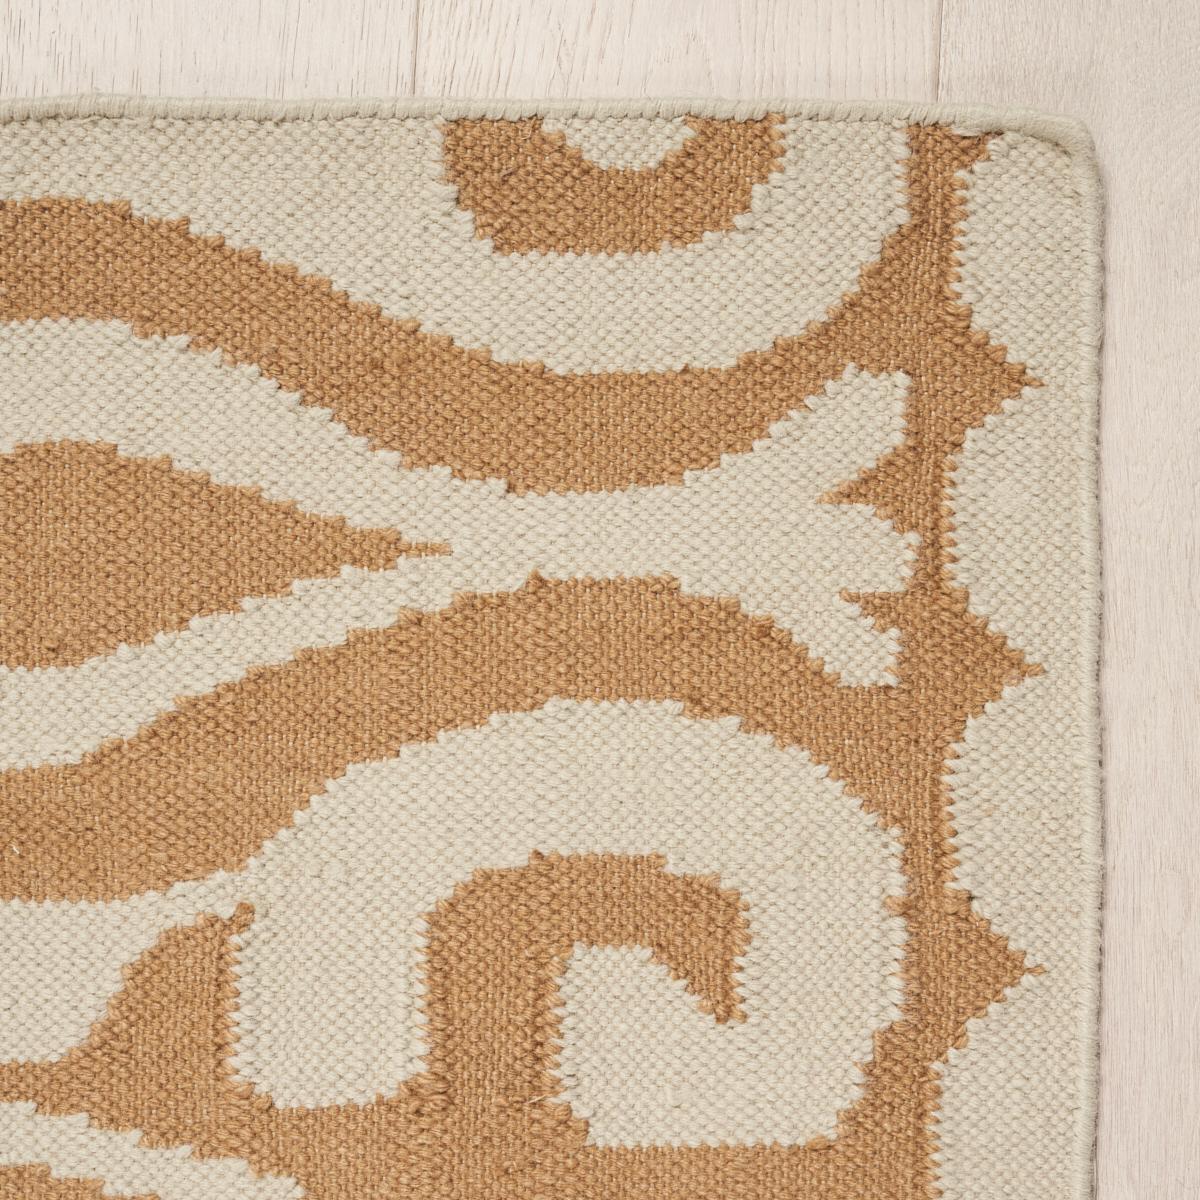 Inspired by Indian motifs, our Seema Indoor/Outdoor Rug is a stylish combination of geometric and abstract elements. Made of 100% recycled PET, it looks and feels like natural fibers, plus it stands up beautifully to foot and paw traffic, indoors